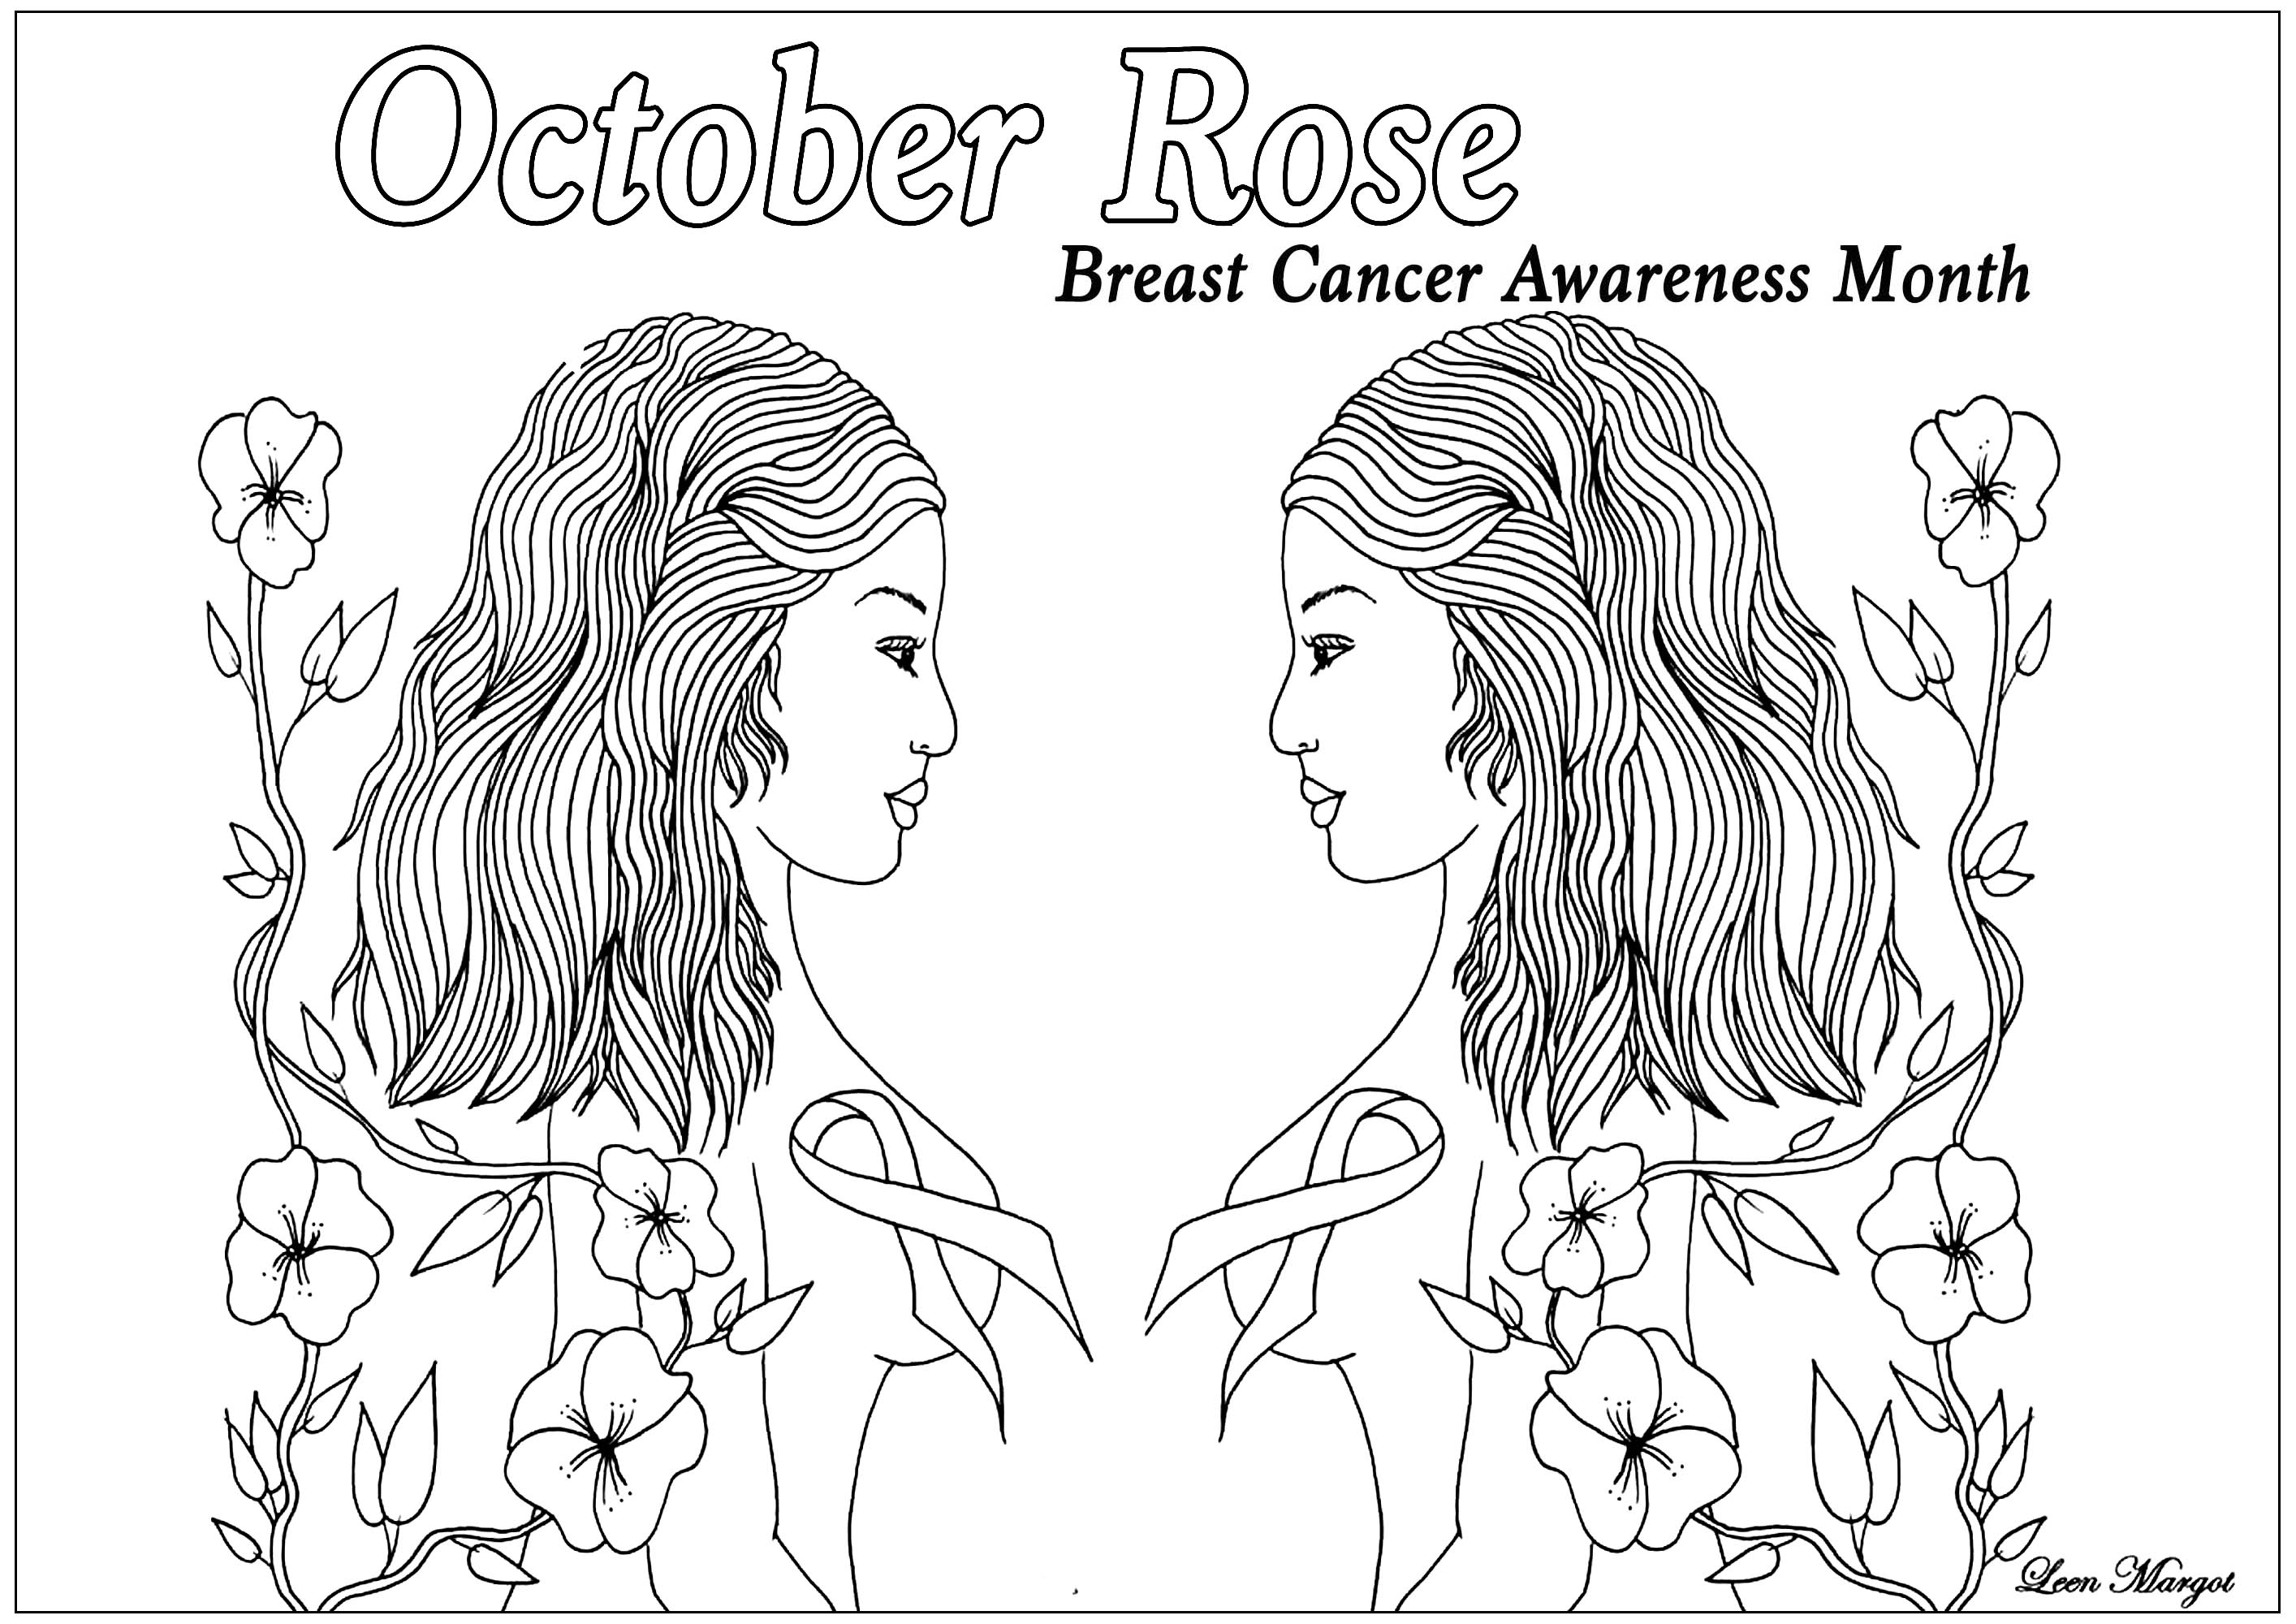 Exclusive coloring page created for October rose : Breast Cancer Awareness Month (Version 2), Artist : Leen Margot